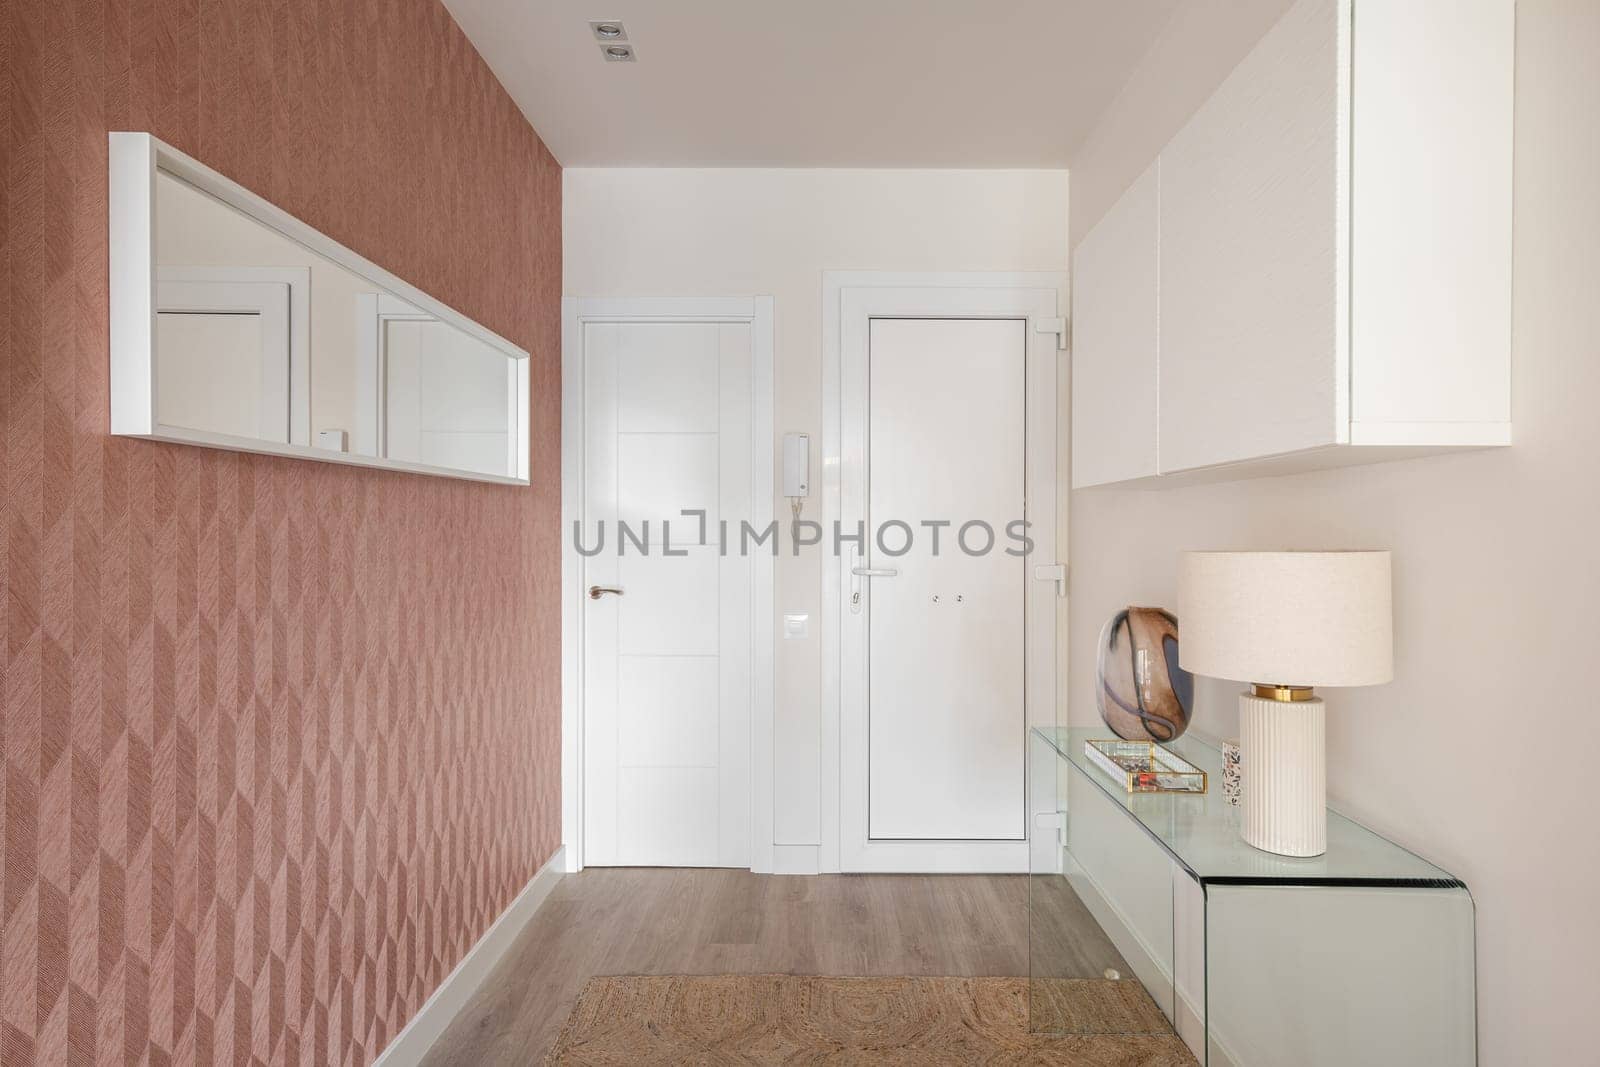 Cozy entrance hall in light colors with an intercom, glass console and wall cabinet with stylish light and an elongated mirror on a peach-colored wall. The concept of a simple laconic room design by apavlin